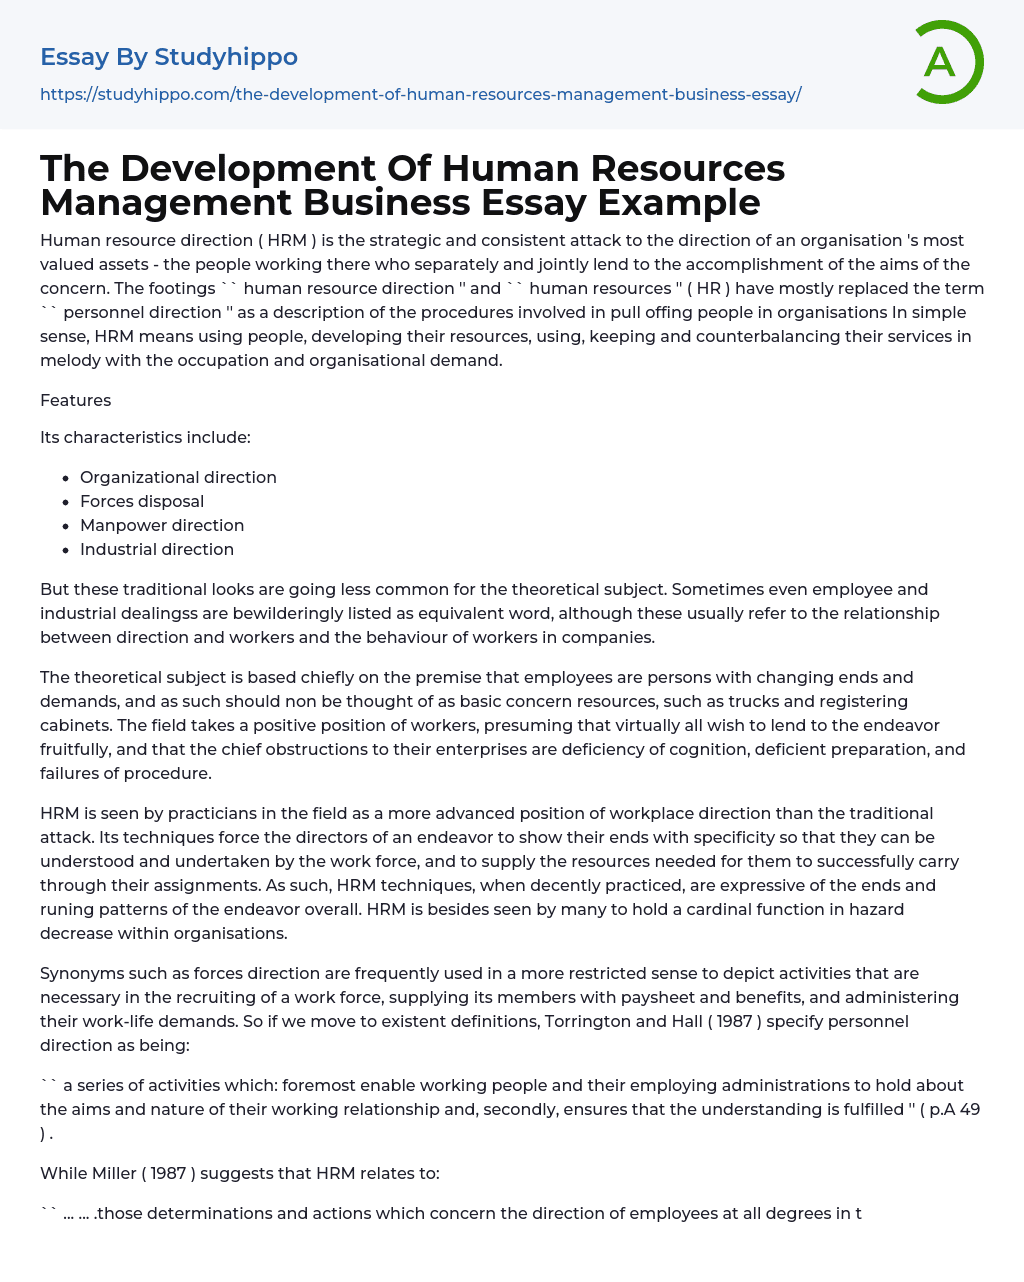 The Development Of Human Resources Management Business Essay Example